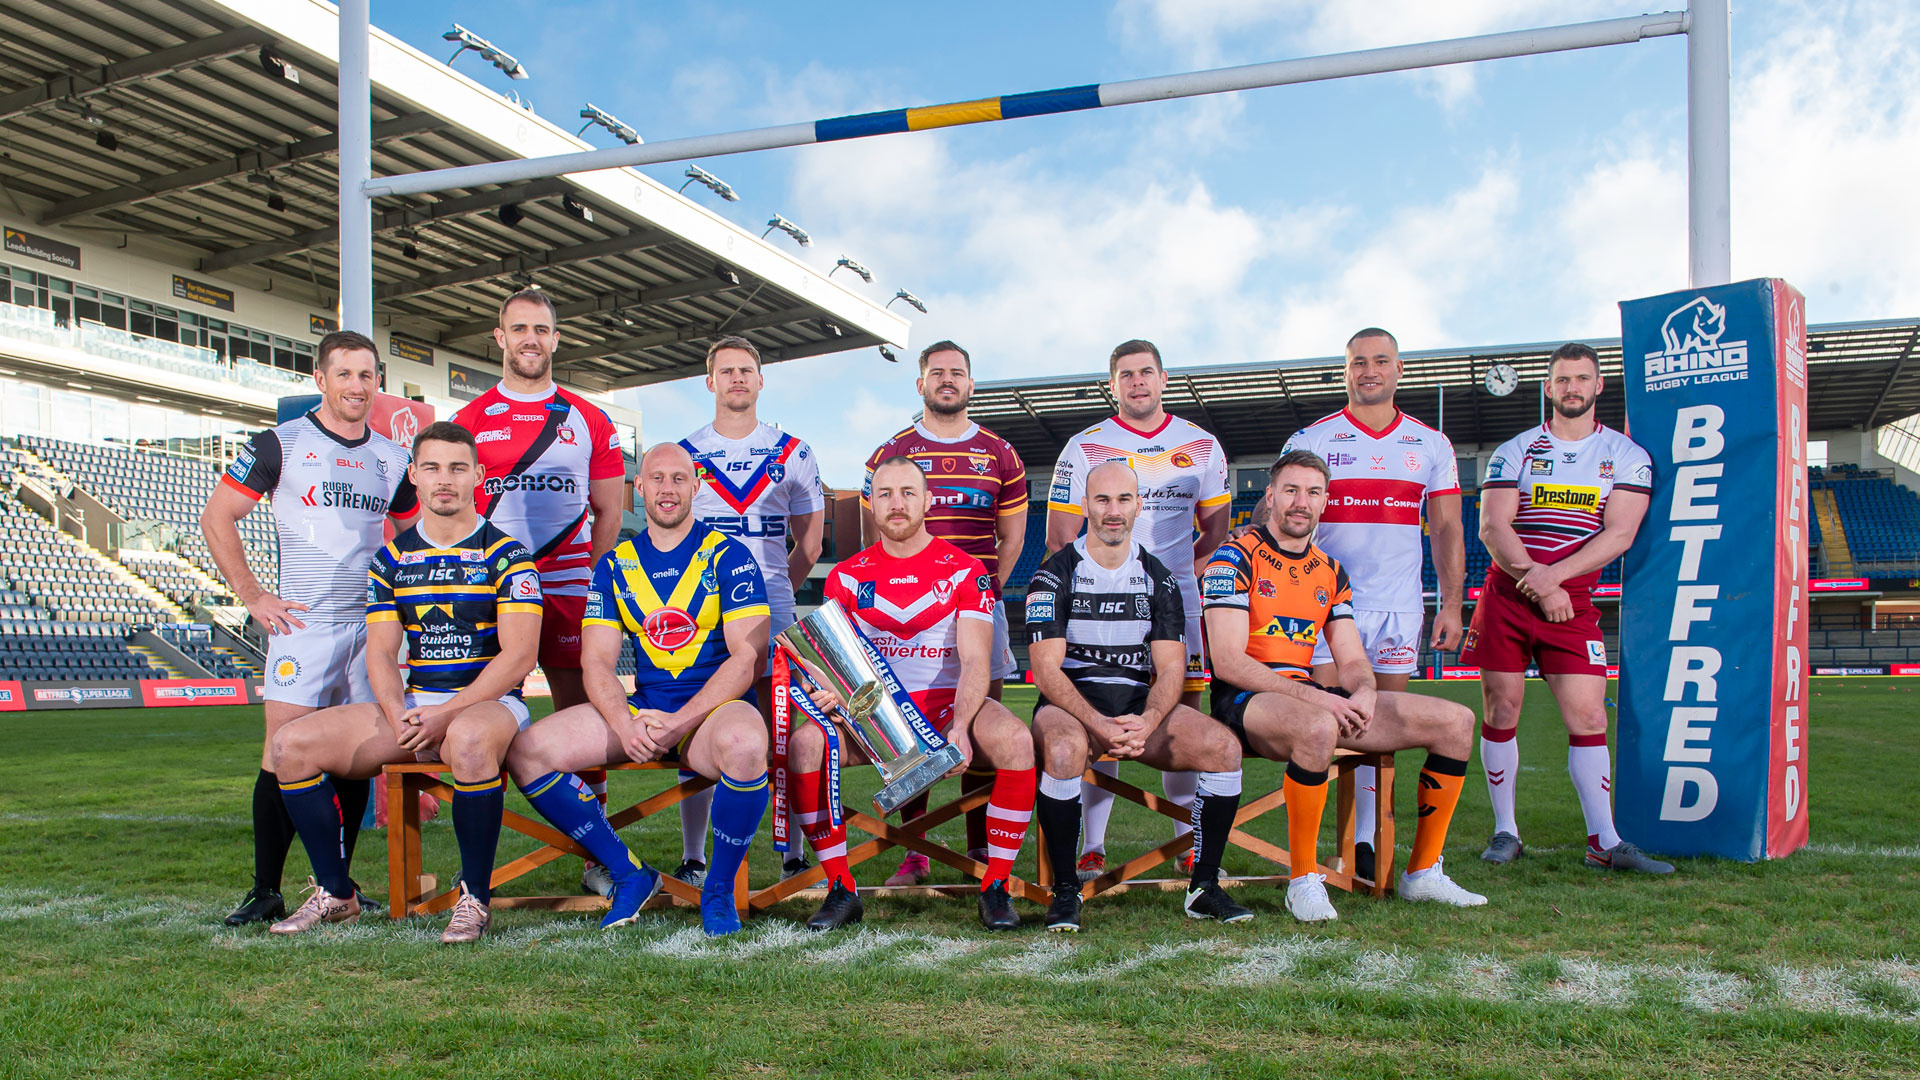 Rugby League: The Betfred Super League players, Professional footballers with a trophy. 1920x1080 Full HD Wallpaper.